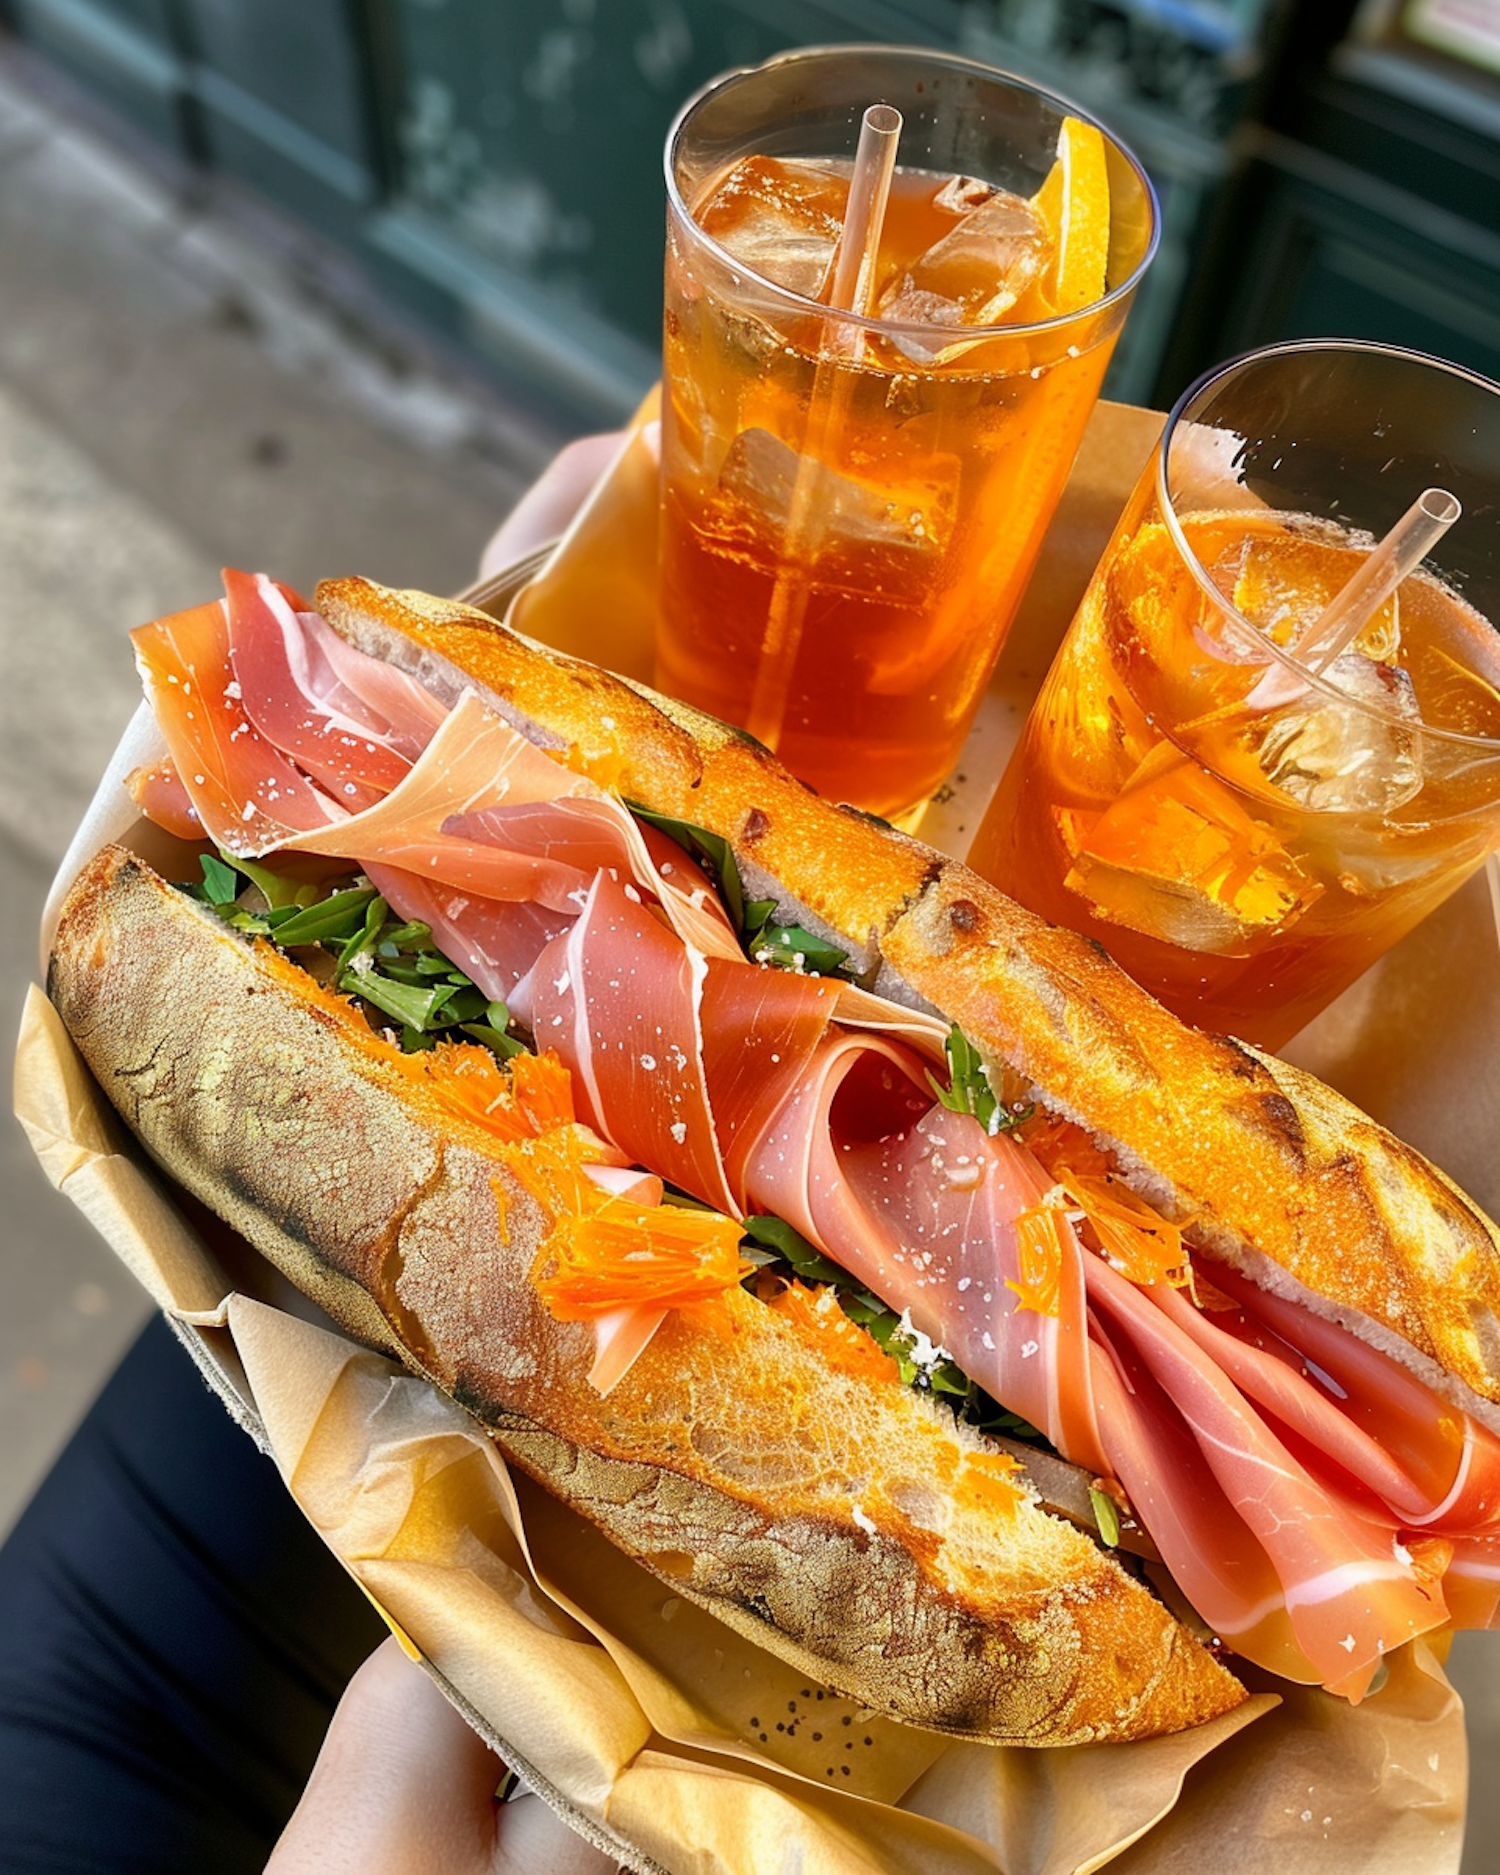 Prosciutto Sandwich and Iced Tea Lunch